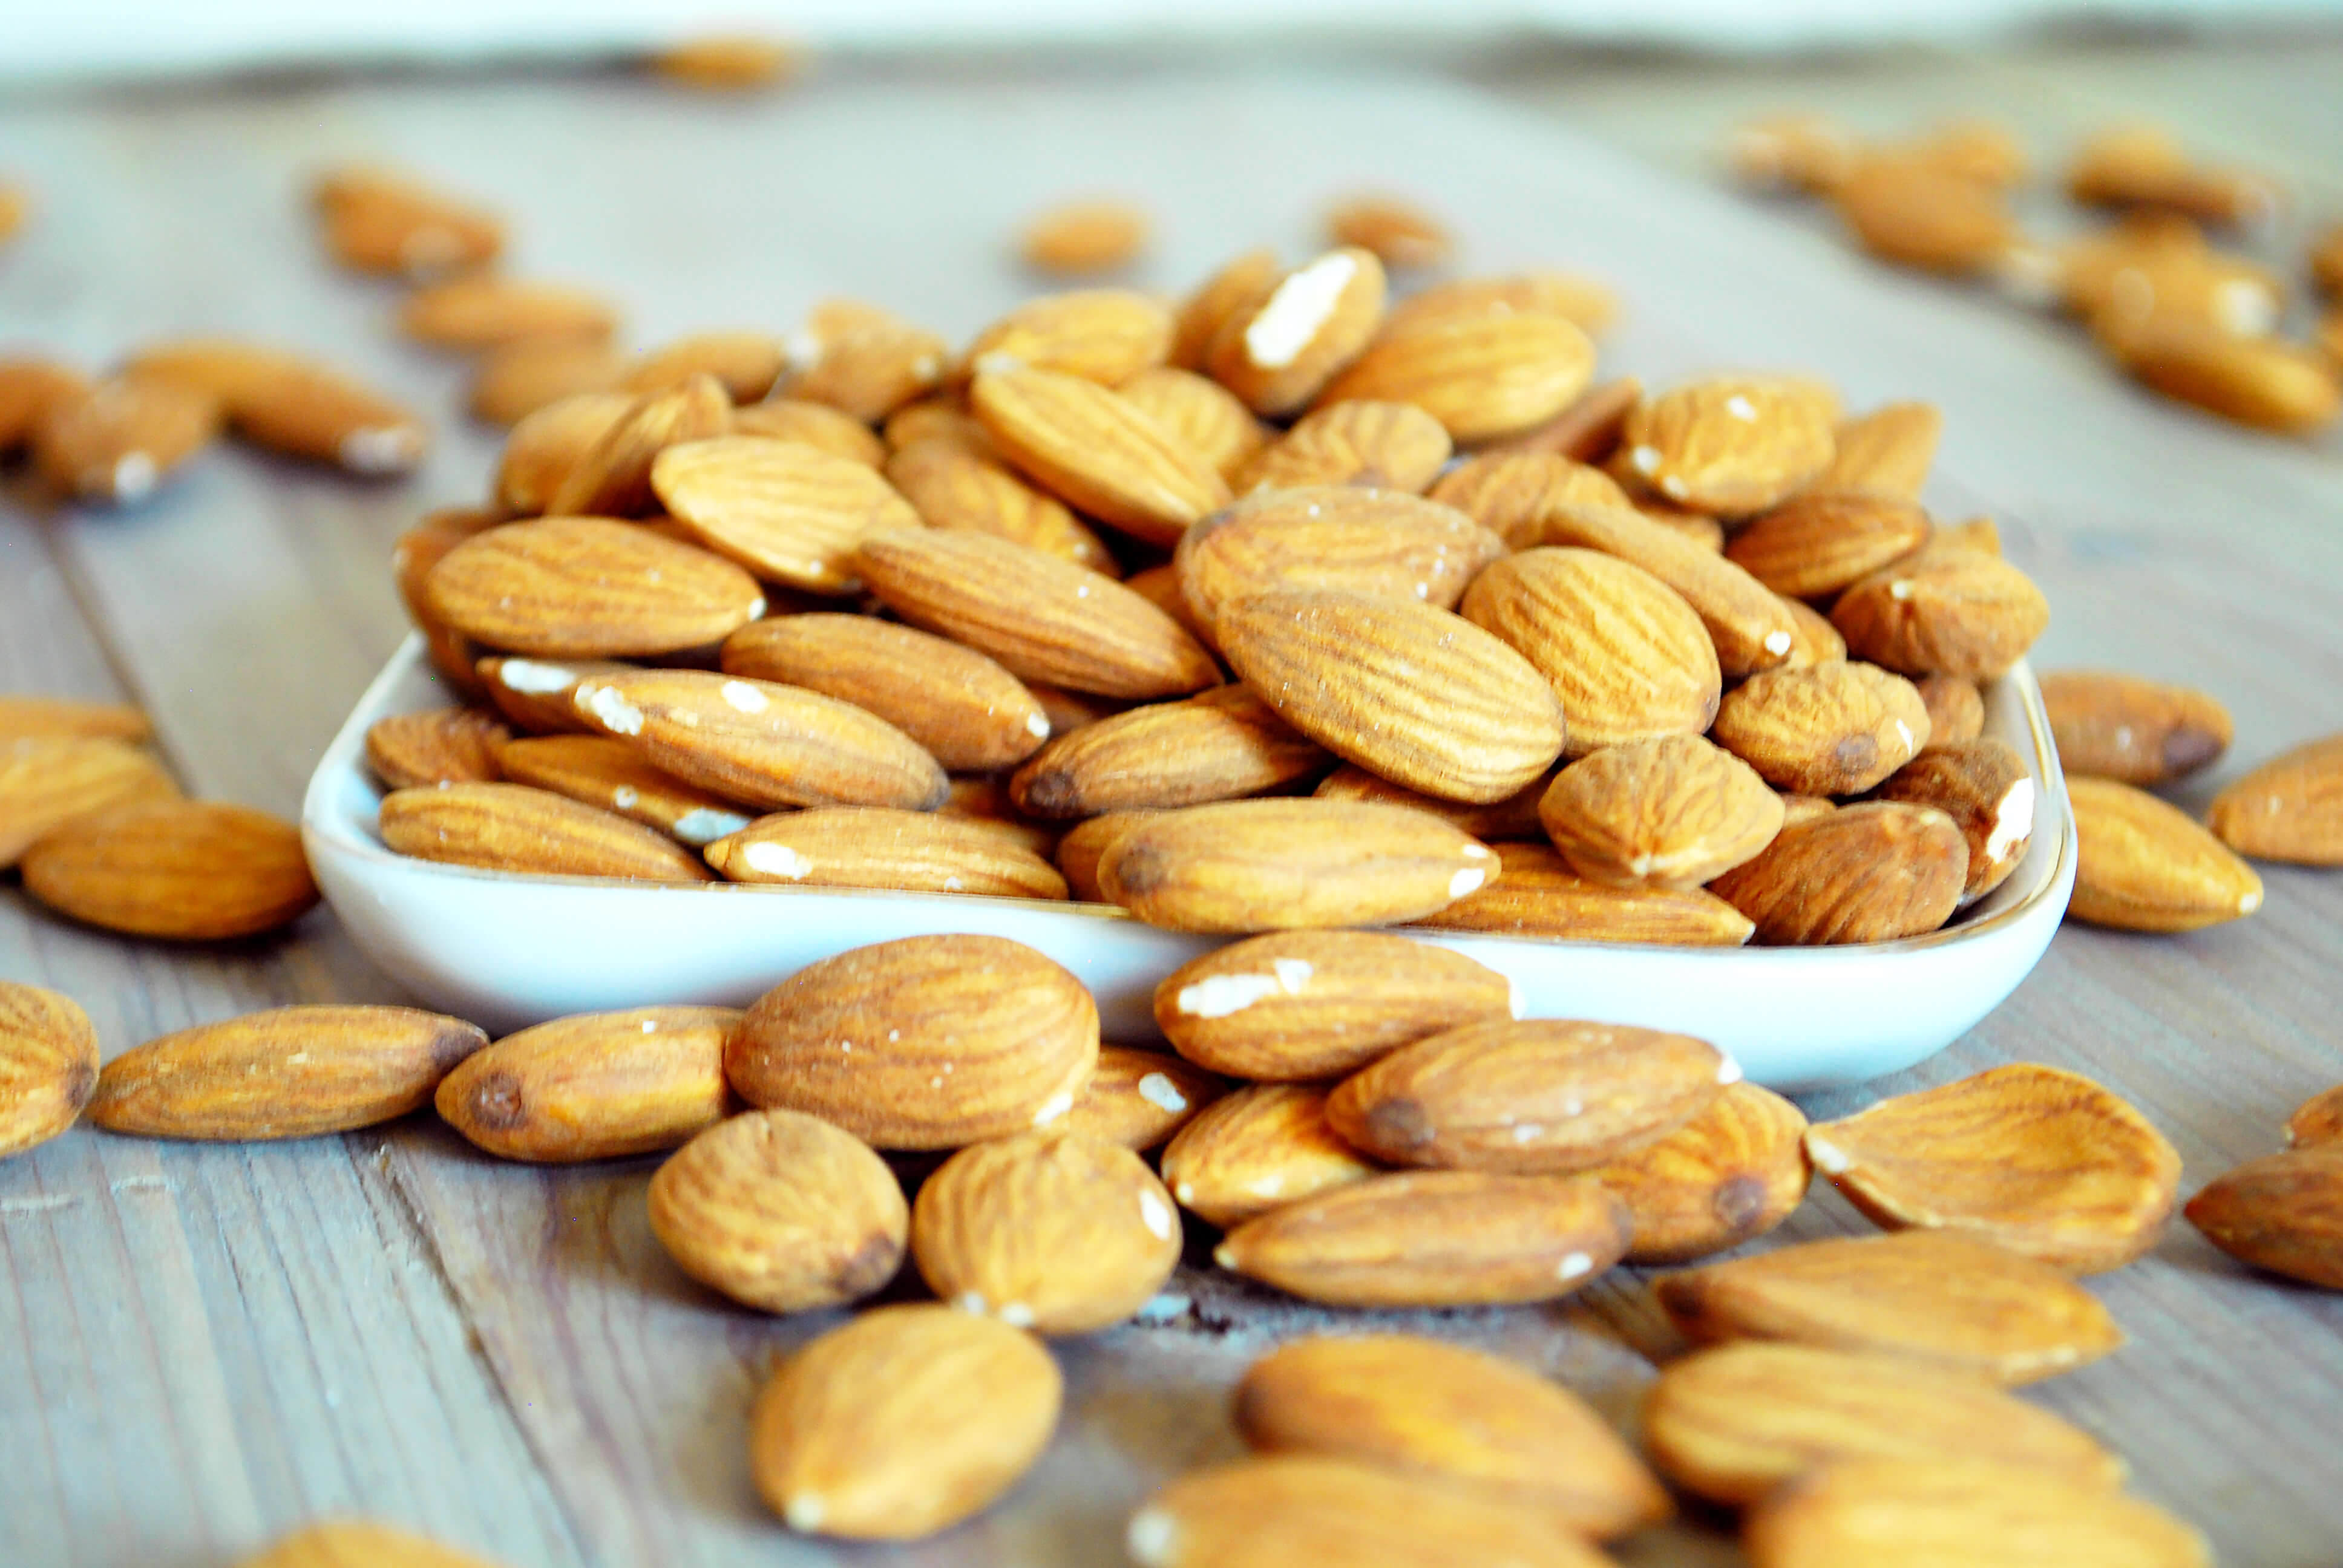 5 best nuts for weight loss